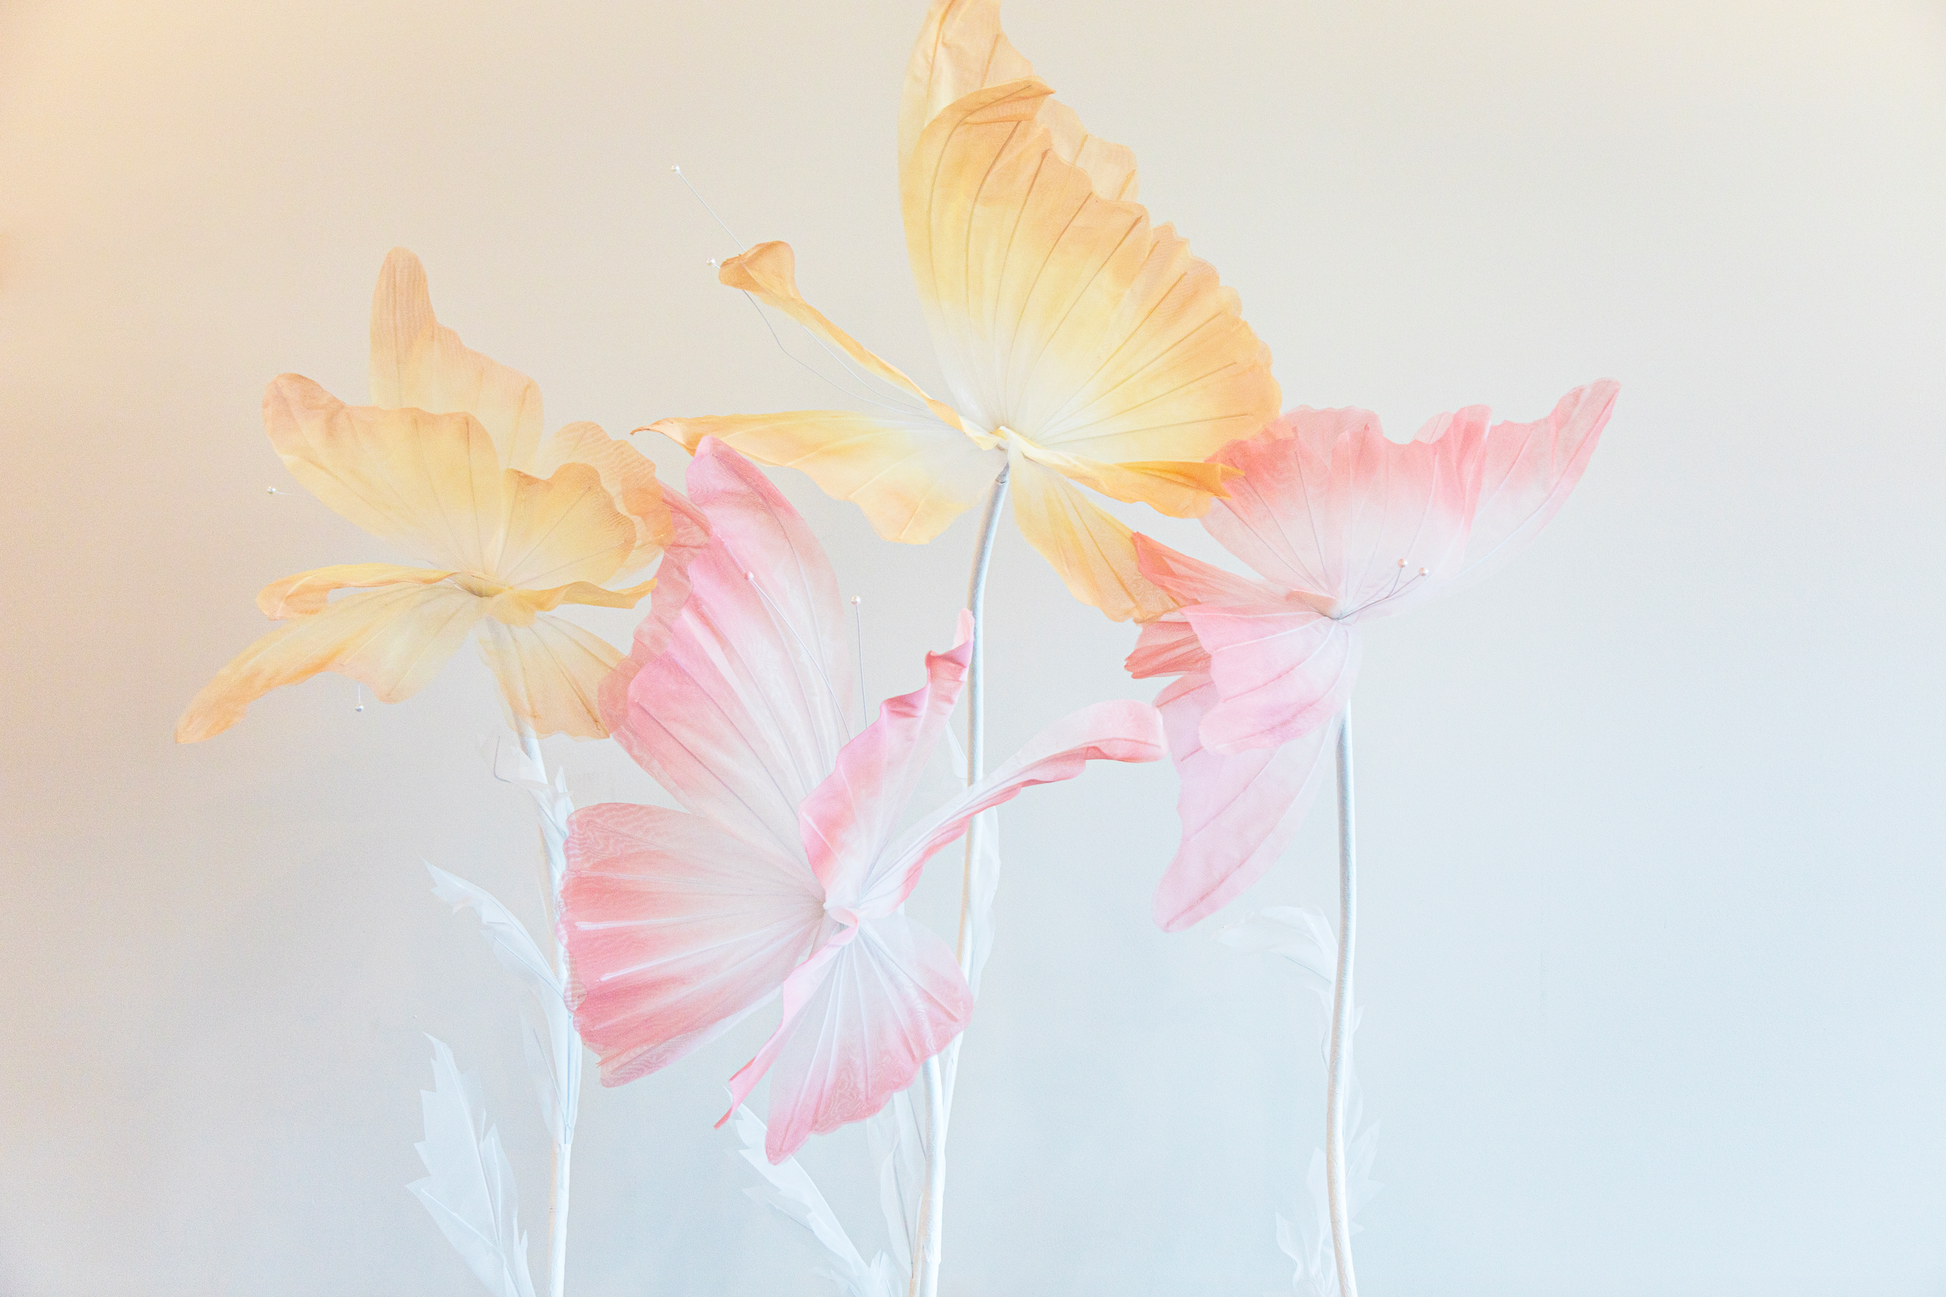 Giant Pink and Yellow Butterflies for event decor